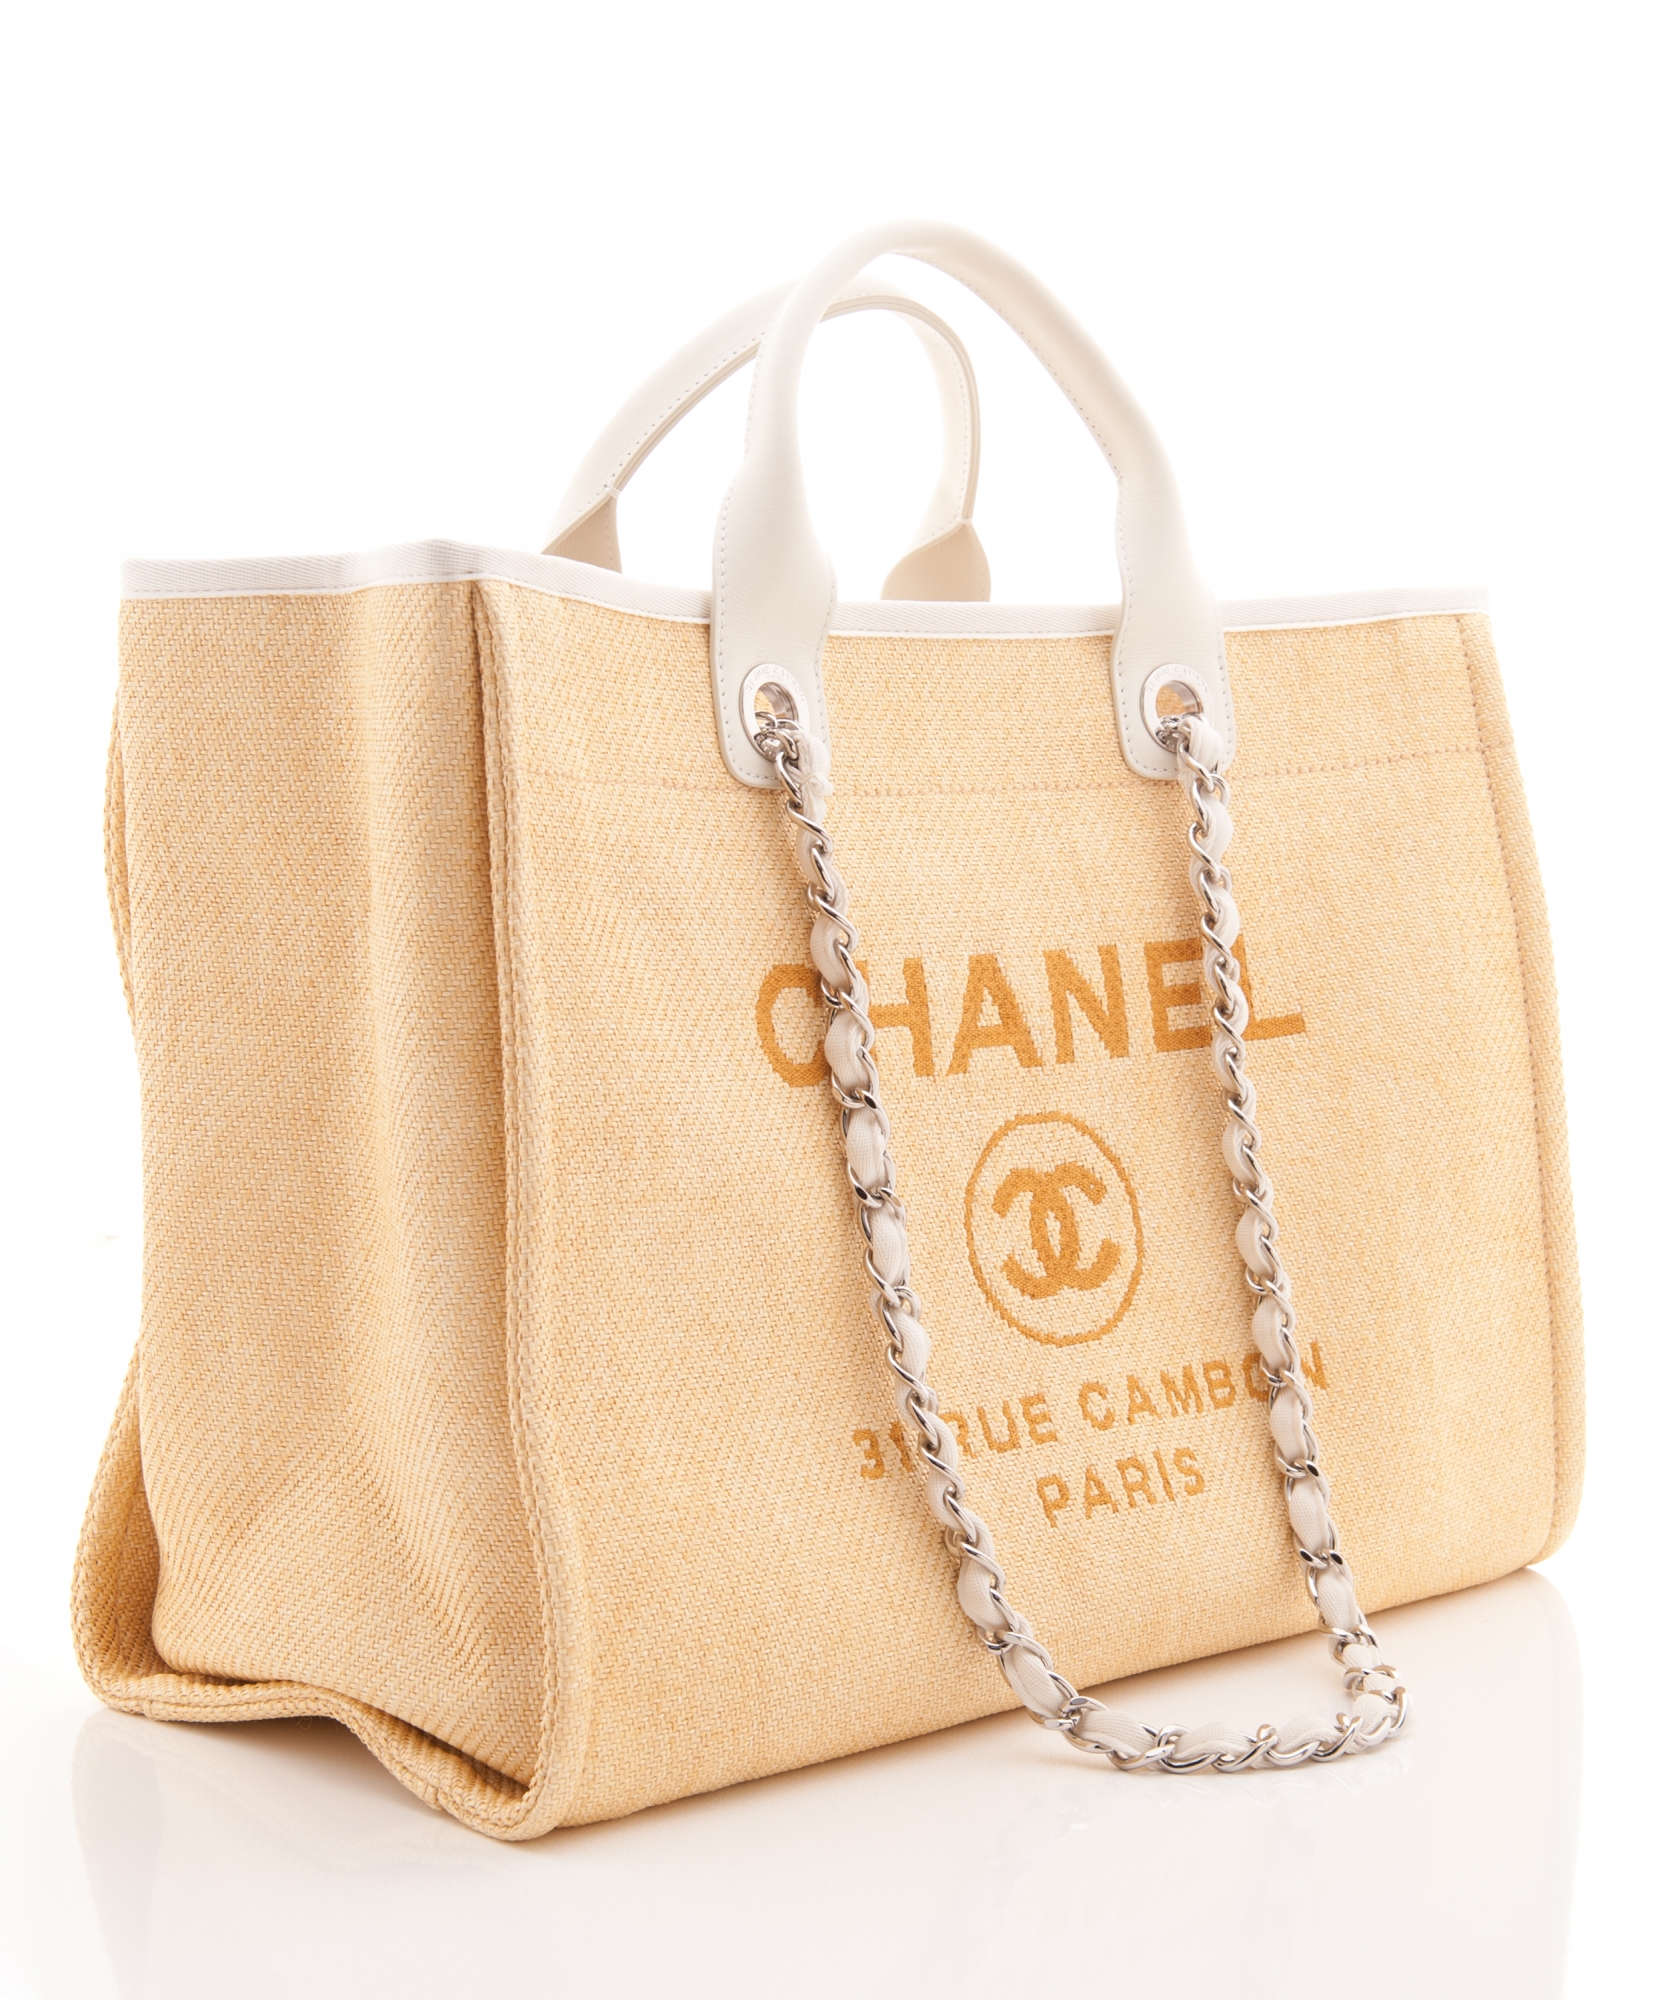 Chanel 'Deauville' Tote Bag in Sandcolor Jacquard - Chanel | ArtListings